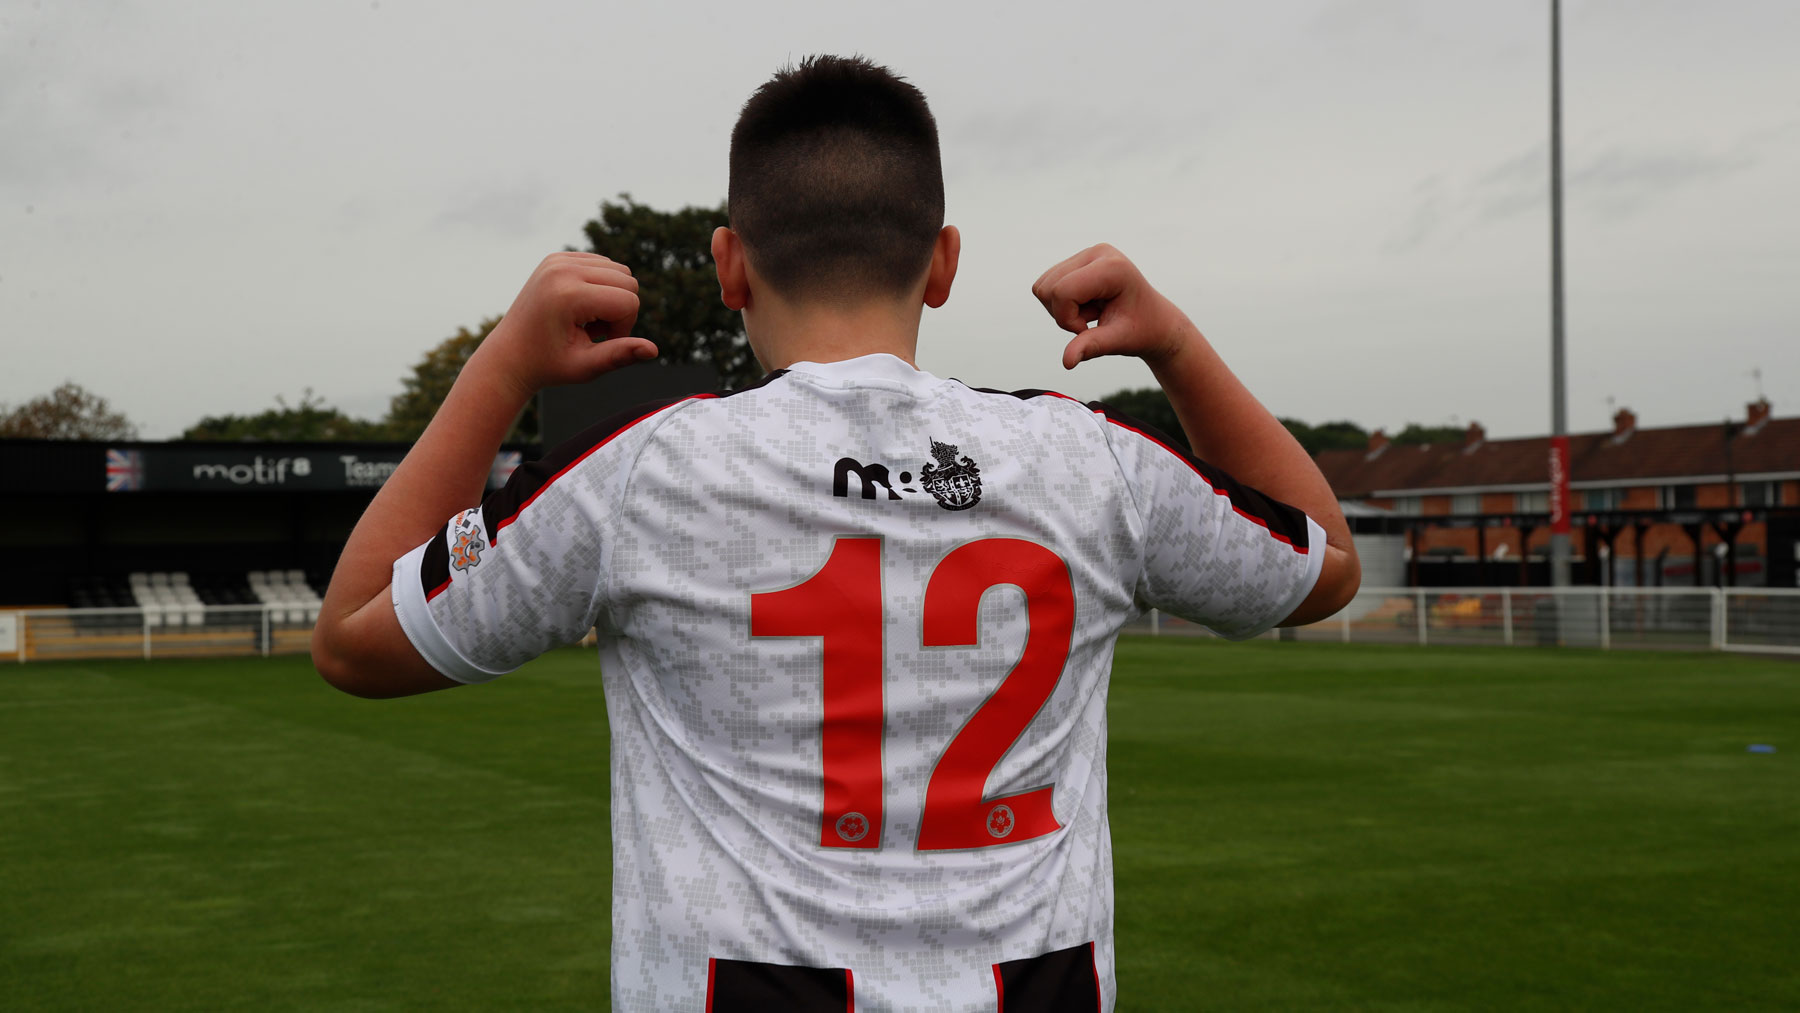 Spennymoor Town's Number 12 is up for grabs